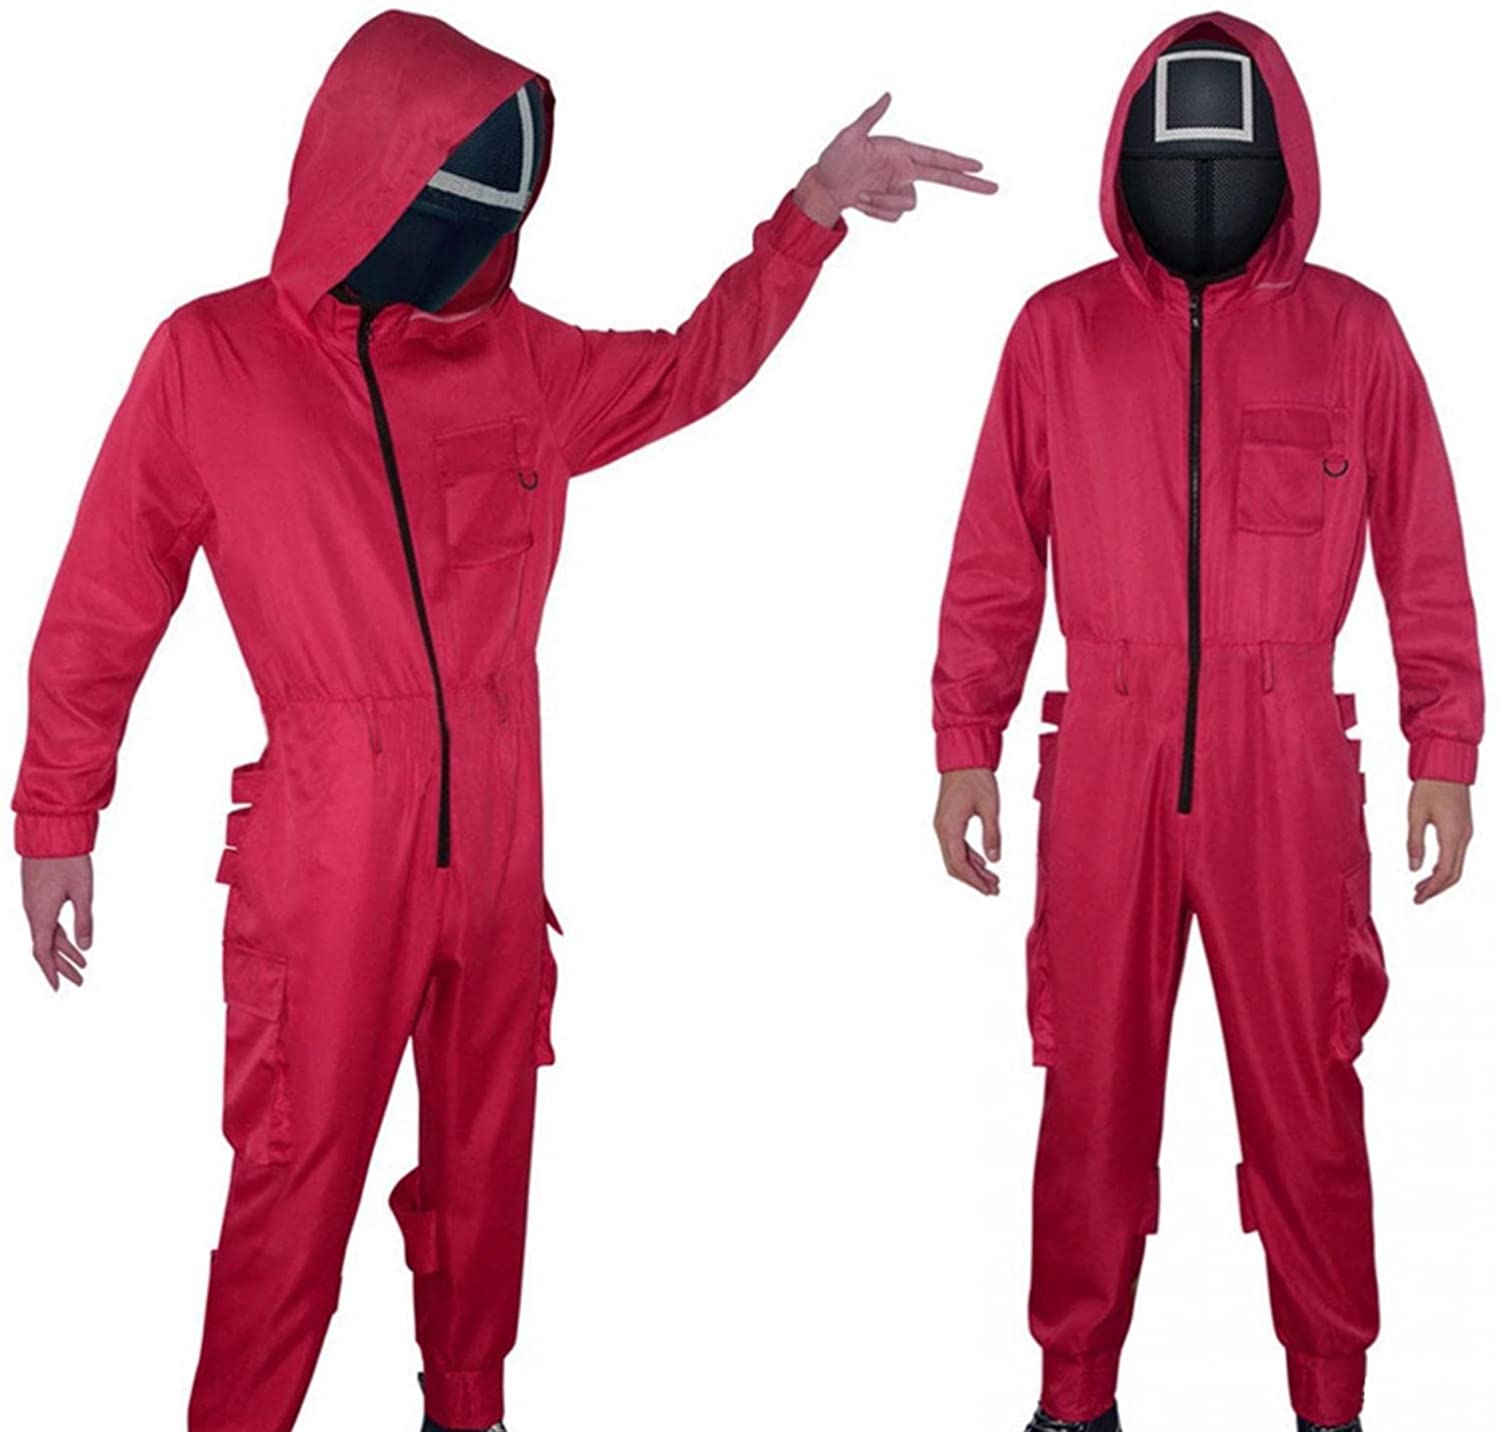 JBEELATE Unisex Halloween Red Jumpsuit Zip up Casual Loose One Piece Hooded  Long Sleeve Rompers Party Group Cosplay Outfits - Walmart.com